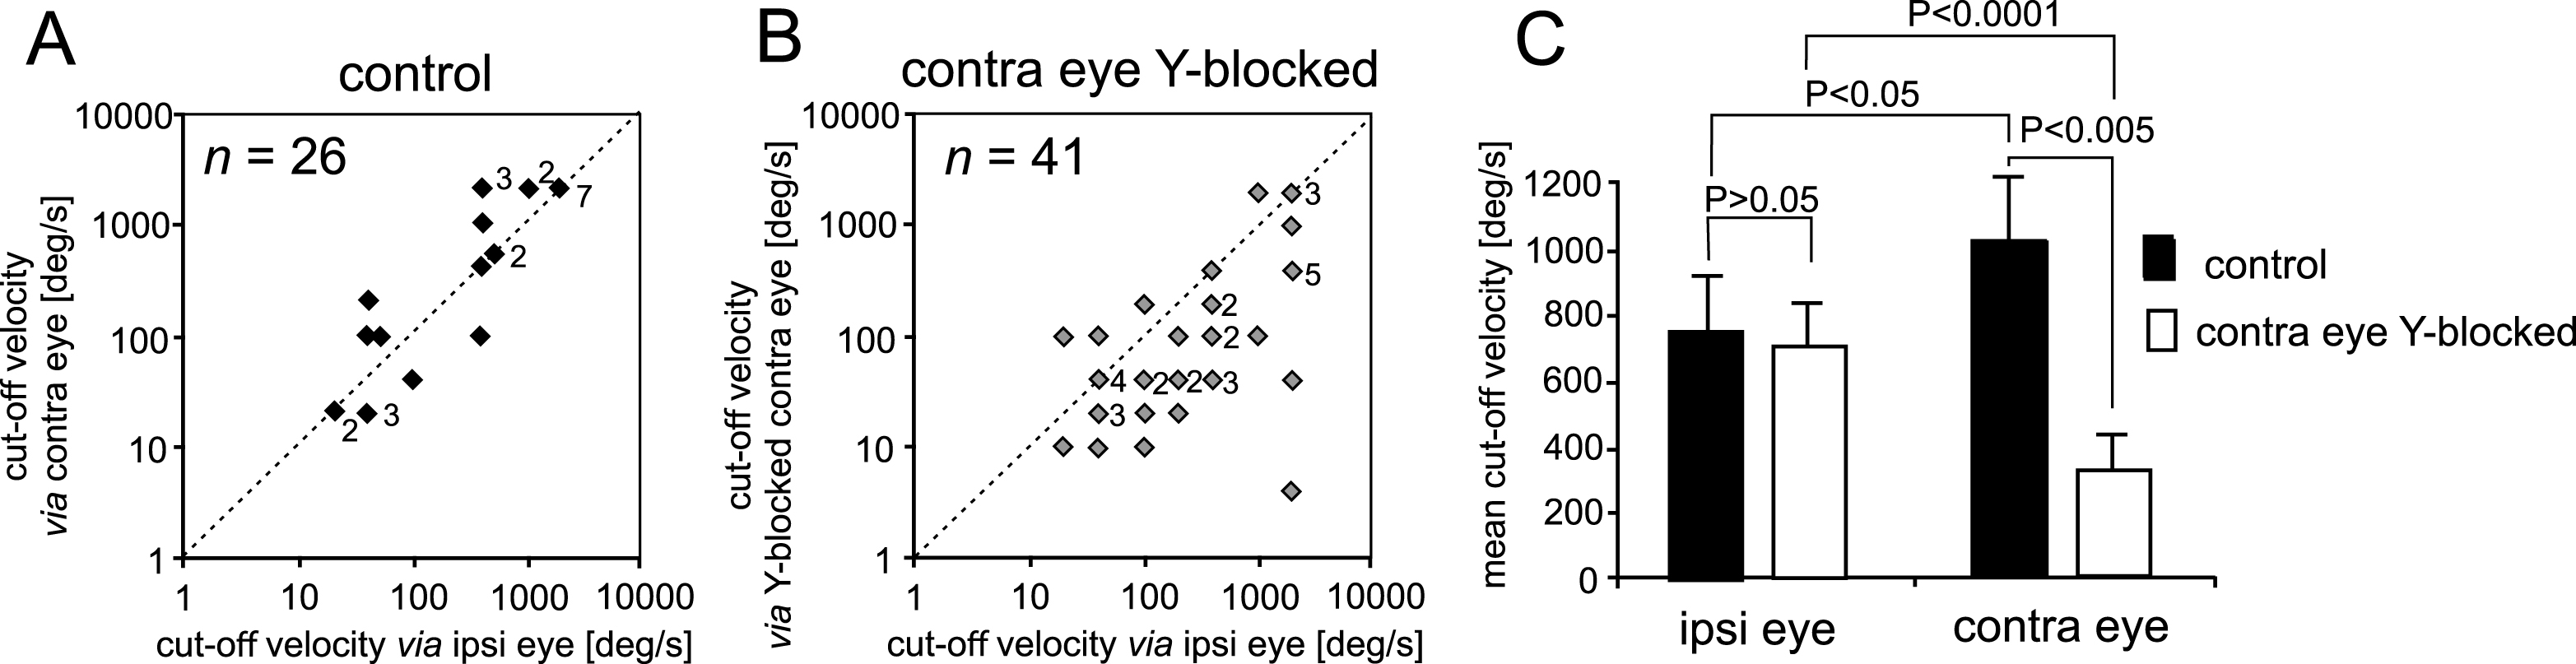 Summary of the effect of selective Y-block on the upper cut-off velocities, i.e., the highest velocities of moving photic stimuli at which any response could be evoked in cat SC. In control cats, the upper cut-off velocities for stimuli presented via the ipsilateral eye were usually very similar or slightly lower than those for stimuli presented via the contralateral eye (A and C). By contrast, the upper cut-off velocities for stimuli presented via the ipsilateral (normal) eye were significantly higher than those for stimuli presented via the Y-blocked, contralateral eye (B and C). There was, however, no difference between the upper cut-off velocities of collicular neurons for stimuli presented via the ipsilateral eye in control cats and the upper cut-off velocities for stimuli presented via the ipsilateral eye of Y-blocked cats. As indicated in Fig. 3C, the upper cut-off velocities for stimuli presented via the Y-blocked contralateral eye were significantly lower than those for stimuli presented via the normal contralateral eye (This figure is a modified part of Fig. 9 from Waleszczyk, Wang, Benedek, Burke, & Dreher, 2004, with permission from Acta Neurobiologiae Experimentalis).